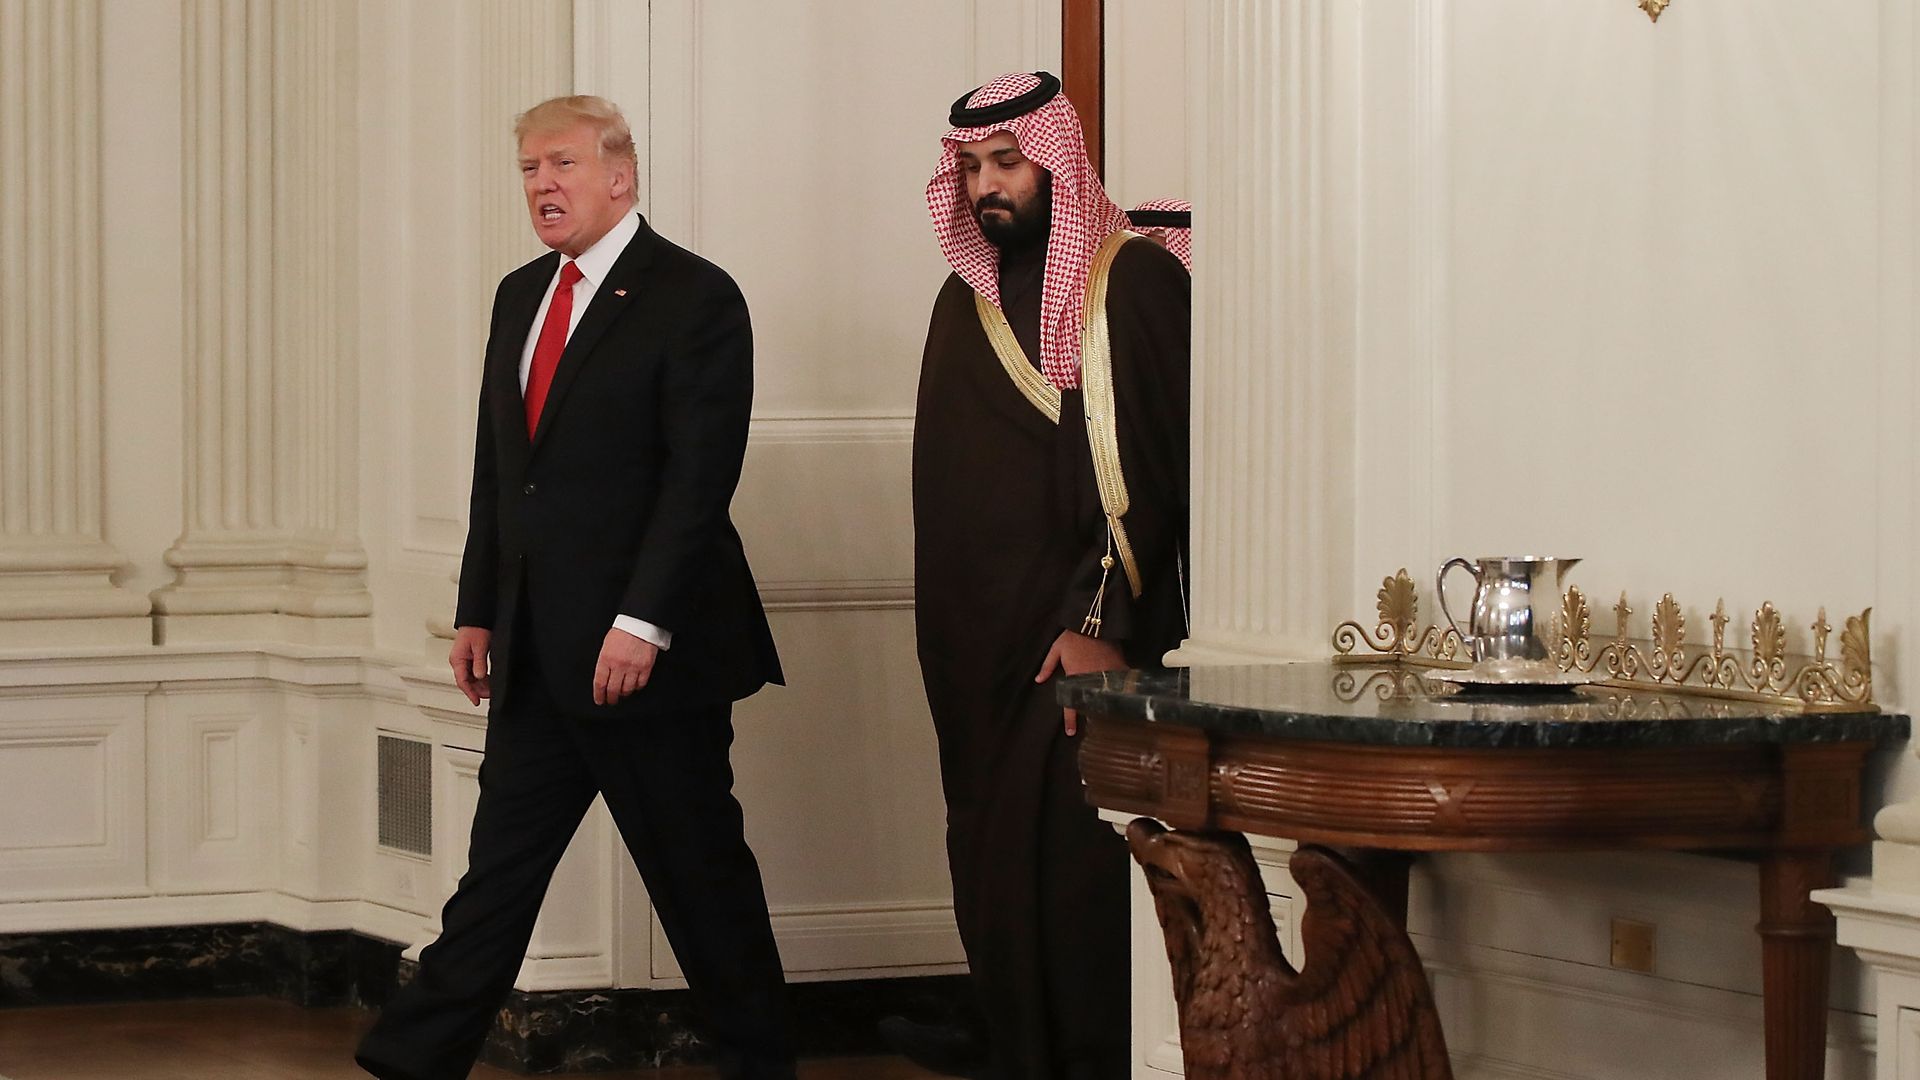 Donald Trump and Mohammed bin Salman walk into the State Dining Room of the White House in March, 2017